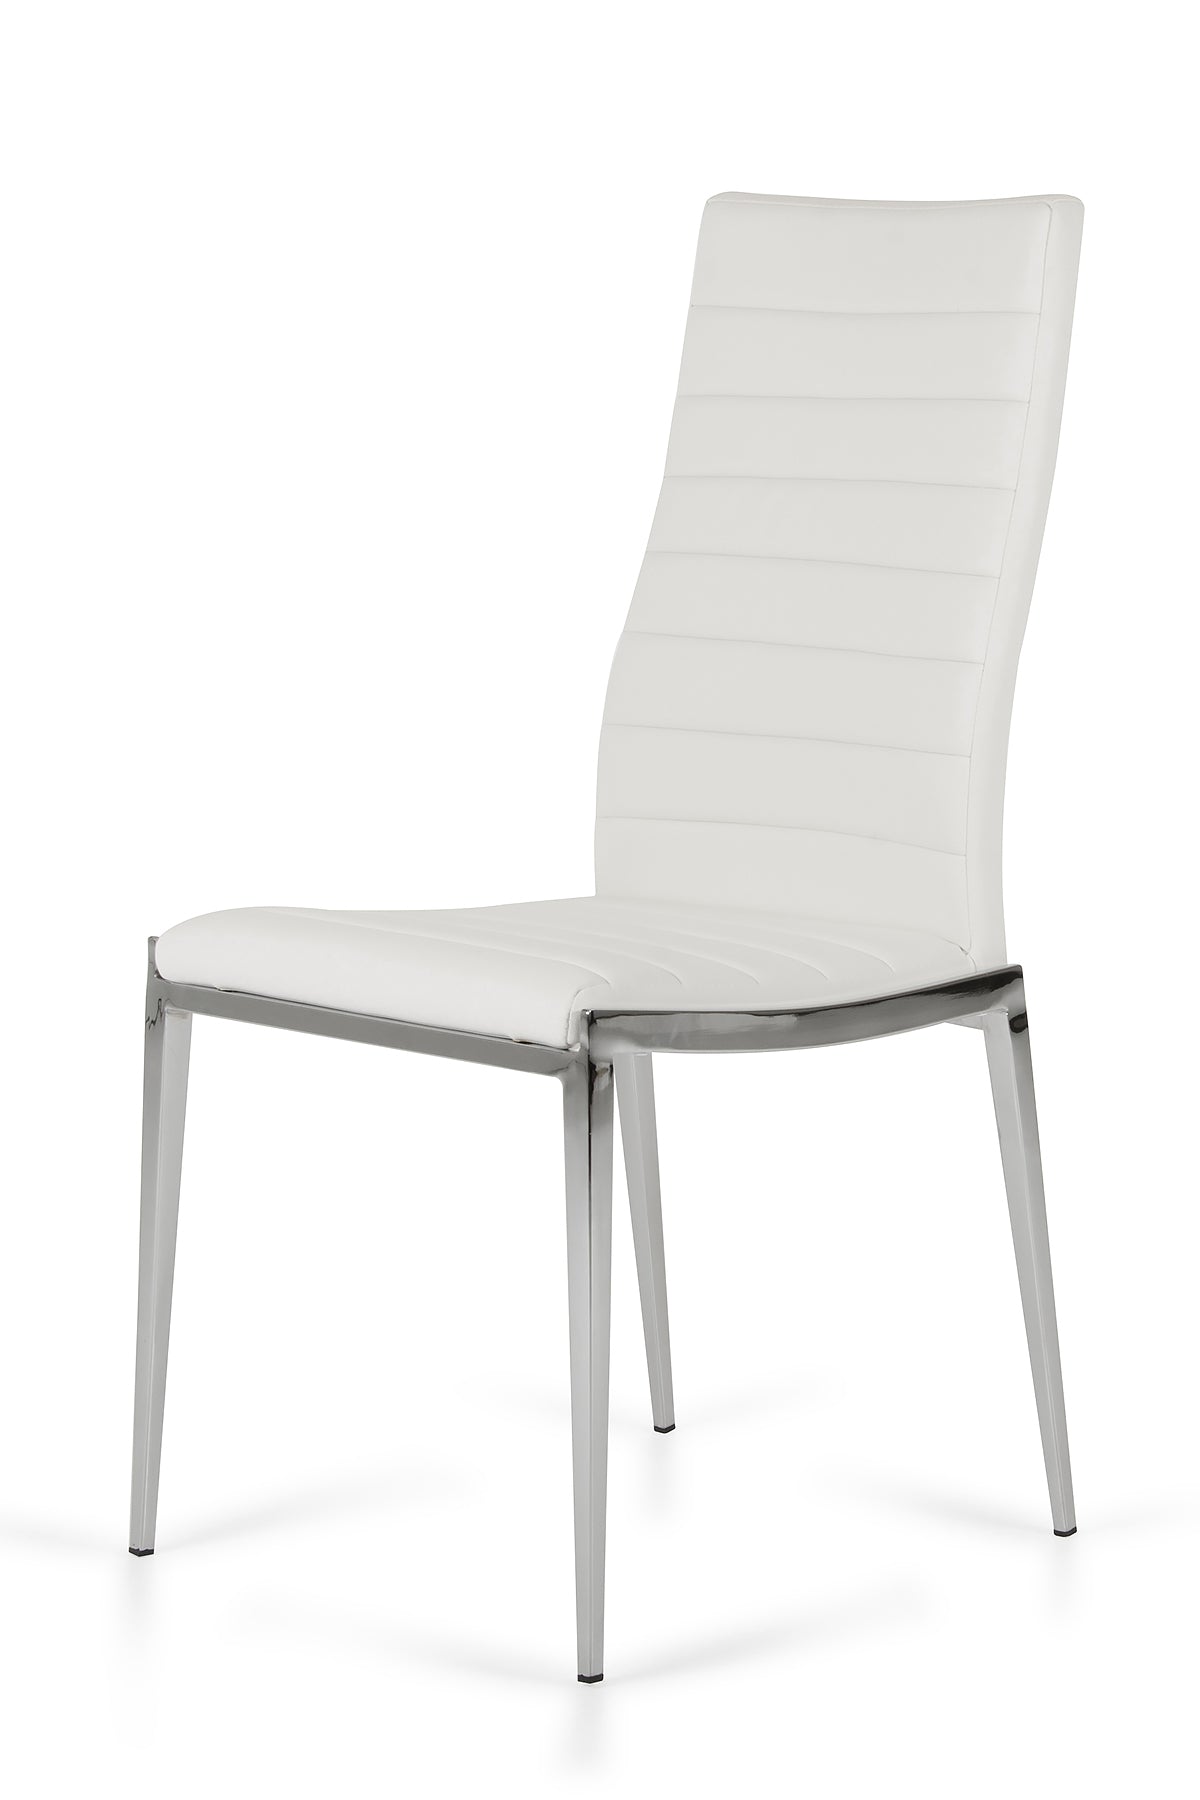 VIG Furniture Libby White Leatherette Dining Chair Set of 2